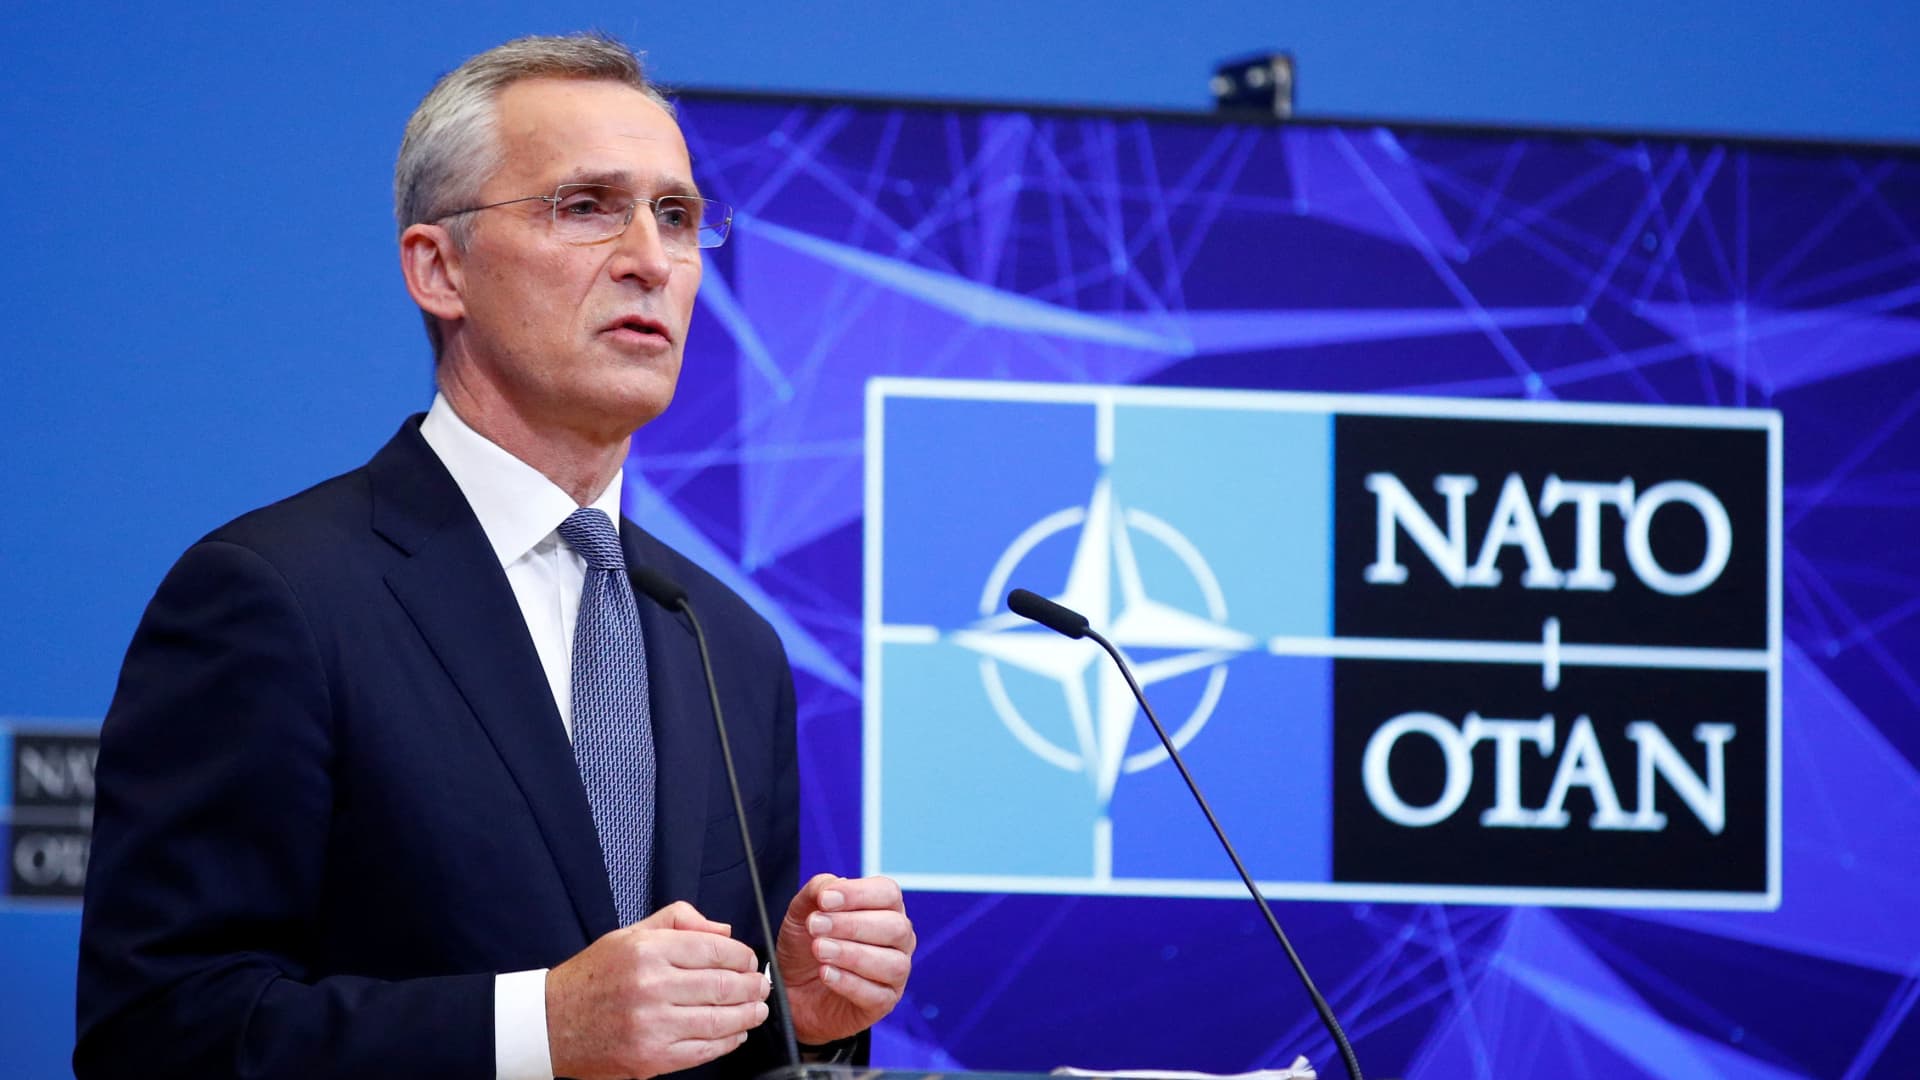 NATO Secretary General Jens Stoltenberg speaks during a news conference at the Alliance's headquarters in Brussels, Belgium January 12, 2022.